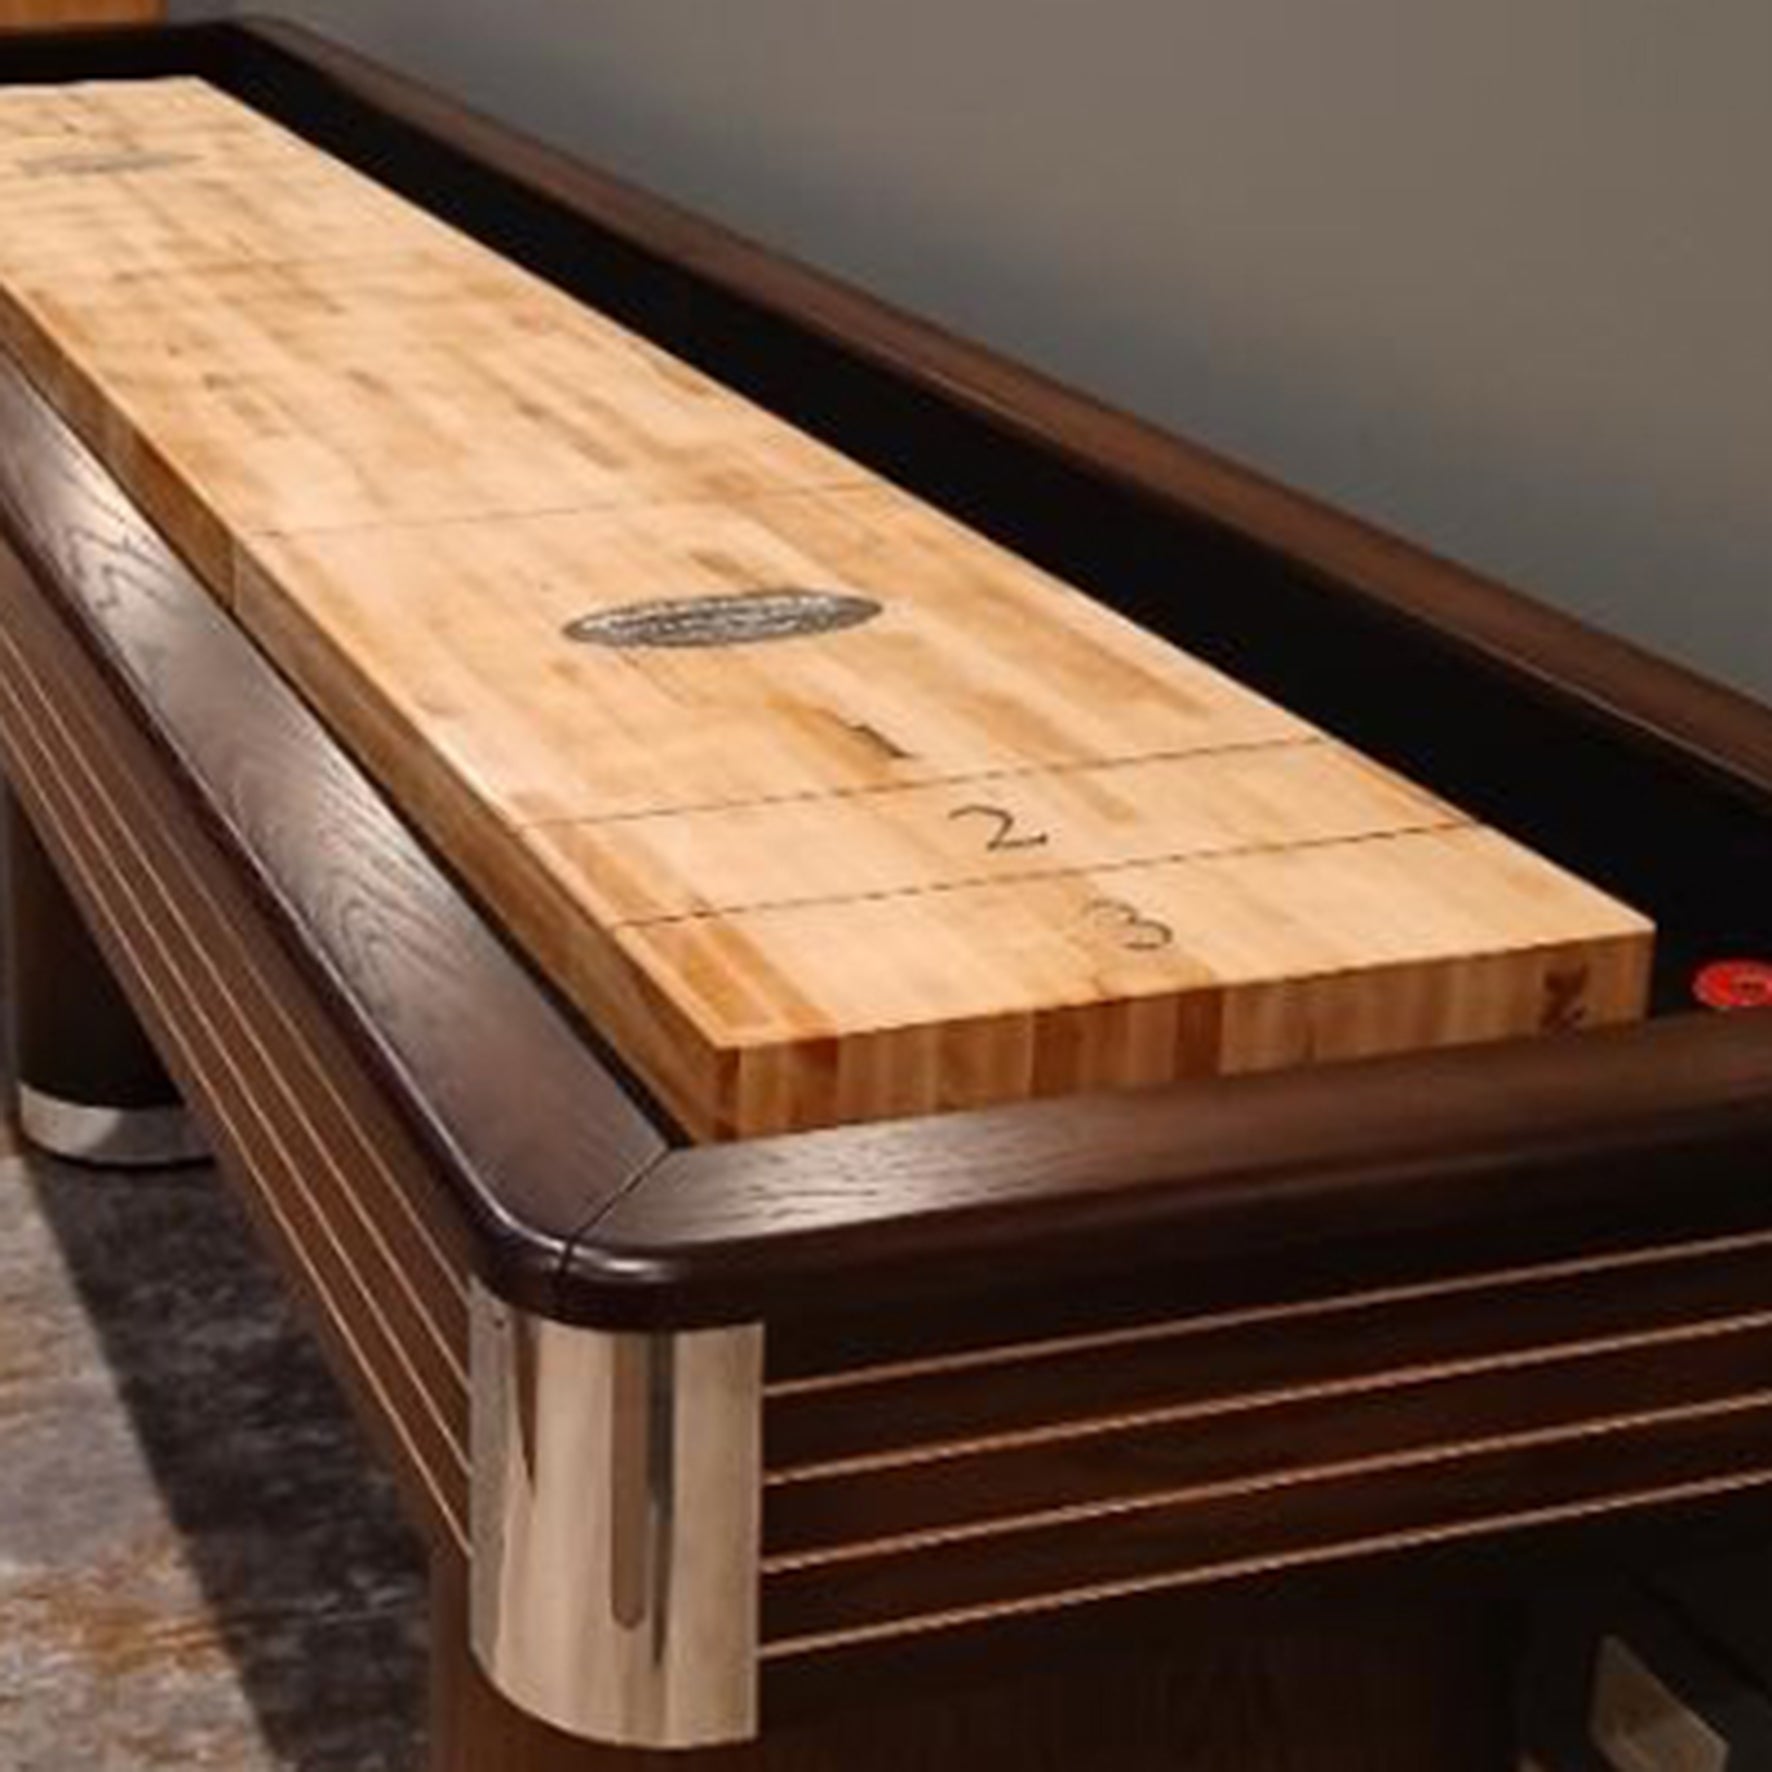 Heritage hand-crafted Shuffleboard by Olhausen